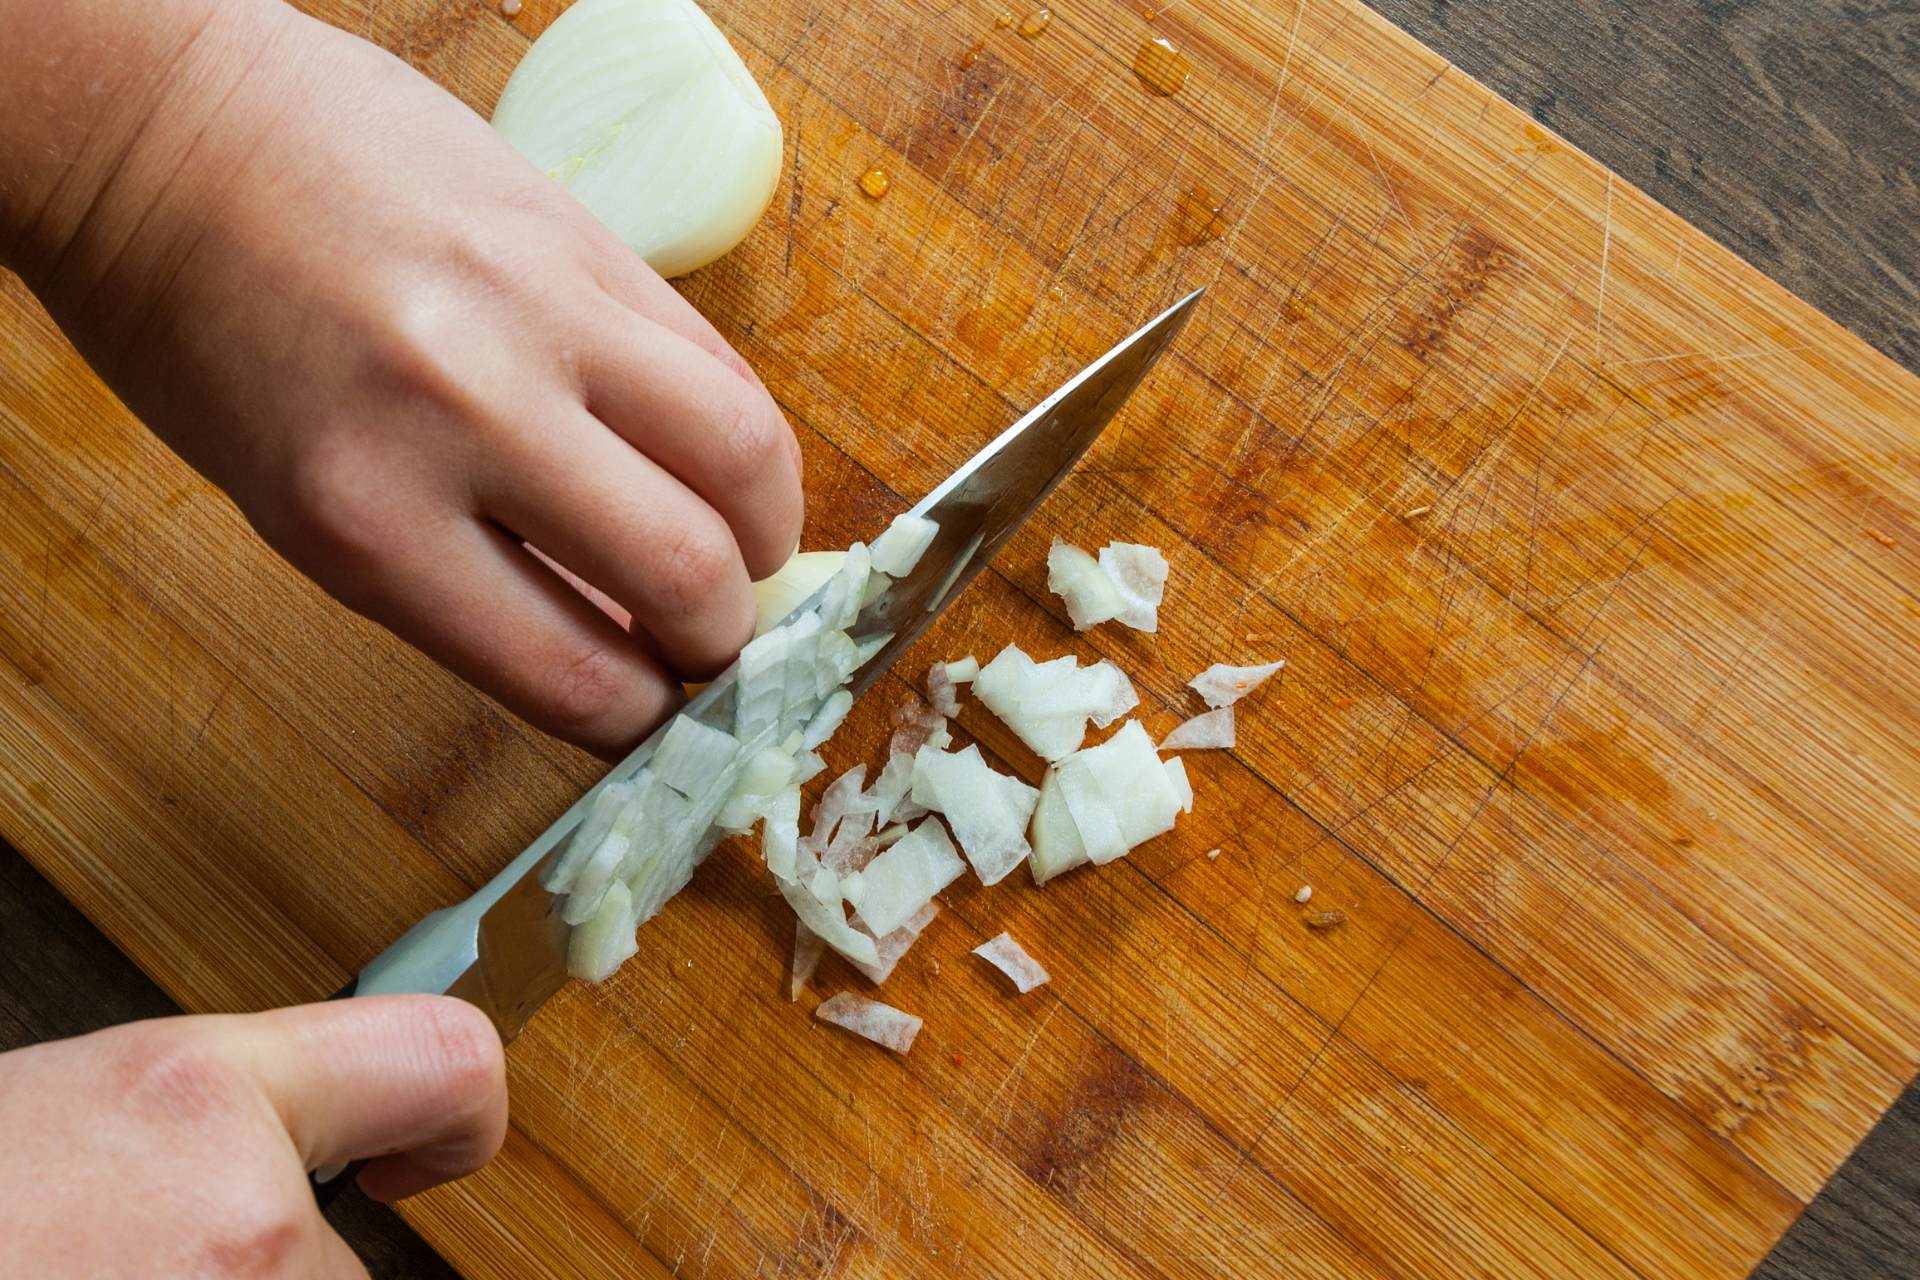 A person chopping onions on a wooden block using a stainless steel knife